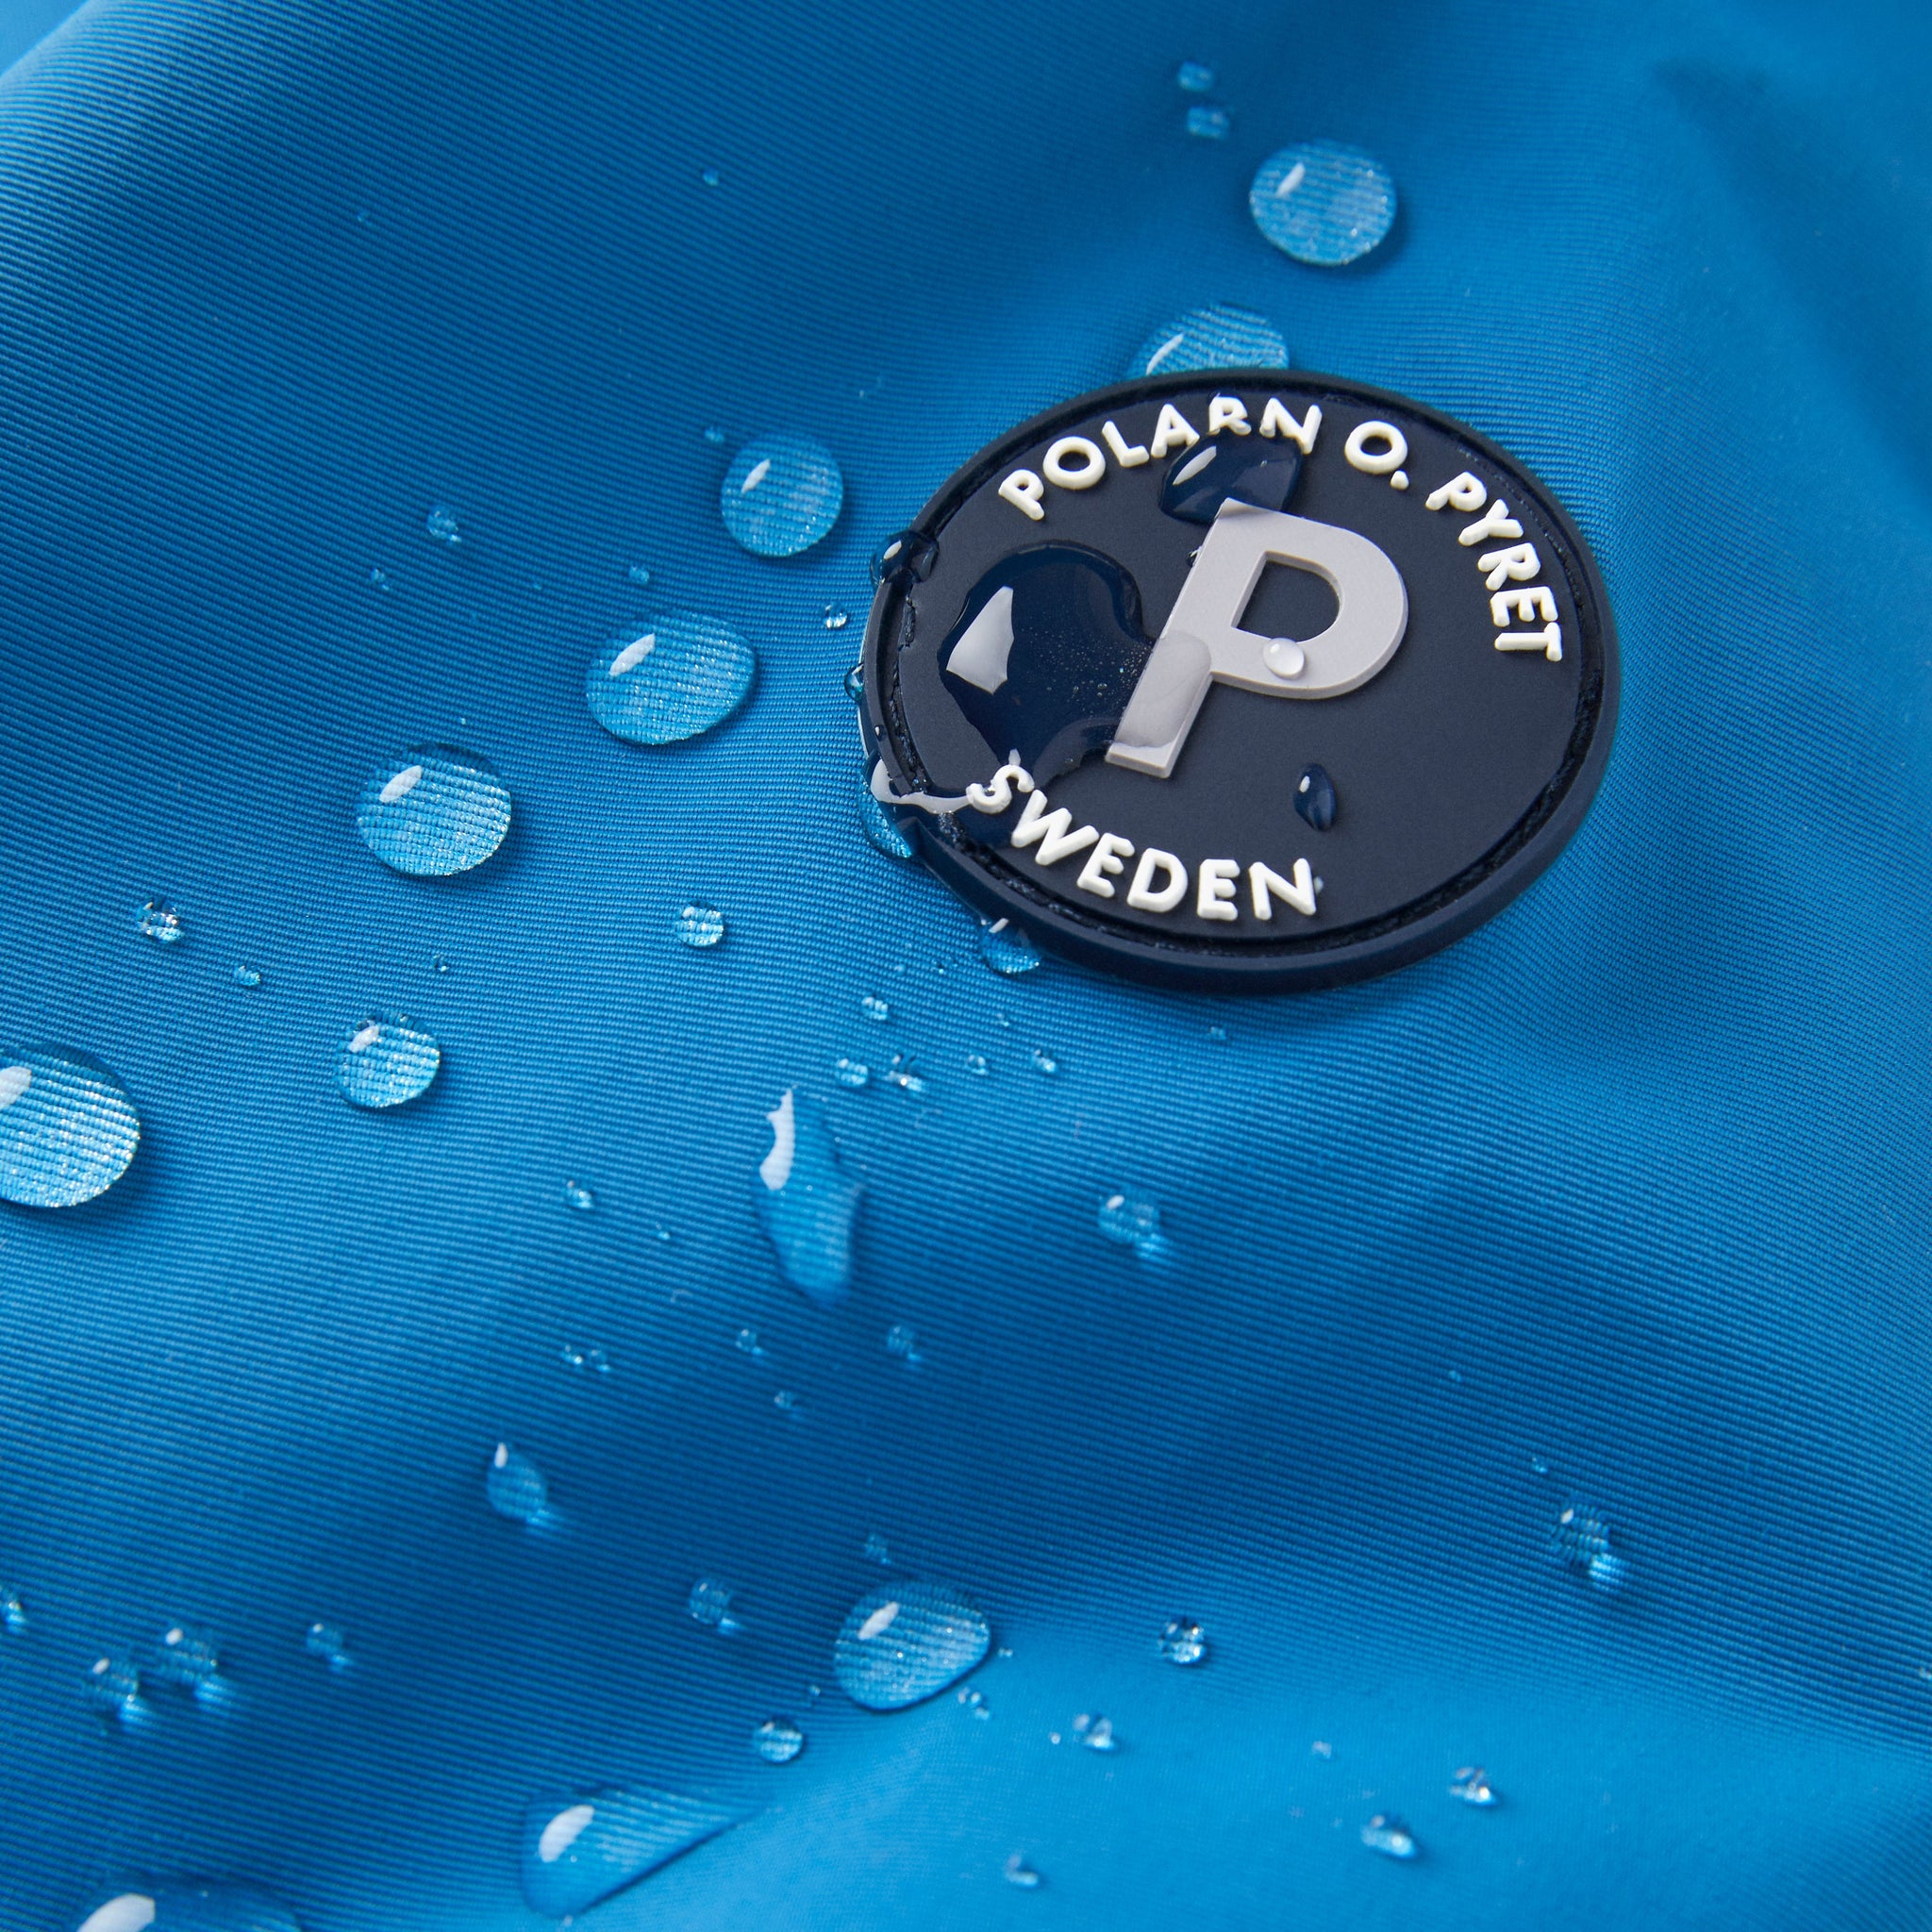 Blue Kids Waterproof Shell Jacket from the Polarn O. Pyret kidswear collection. The best ethical kids outerwear.